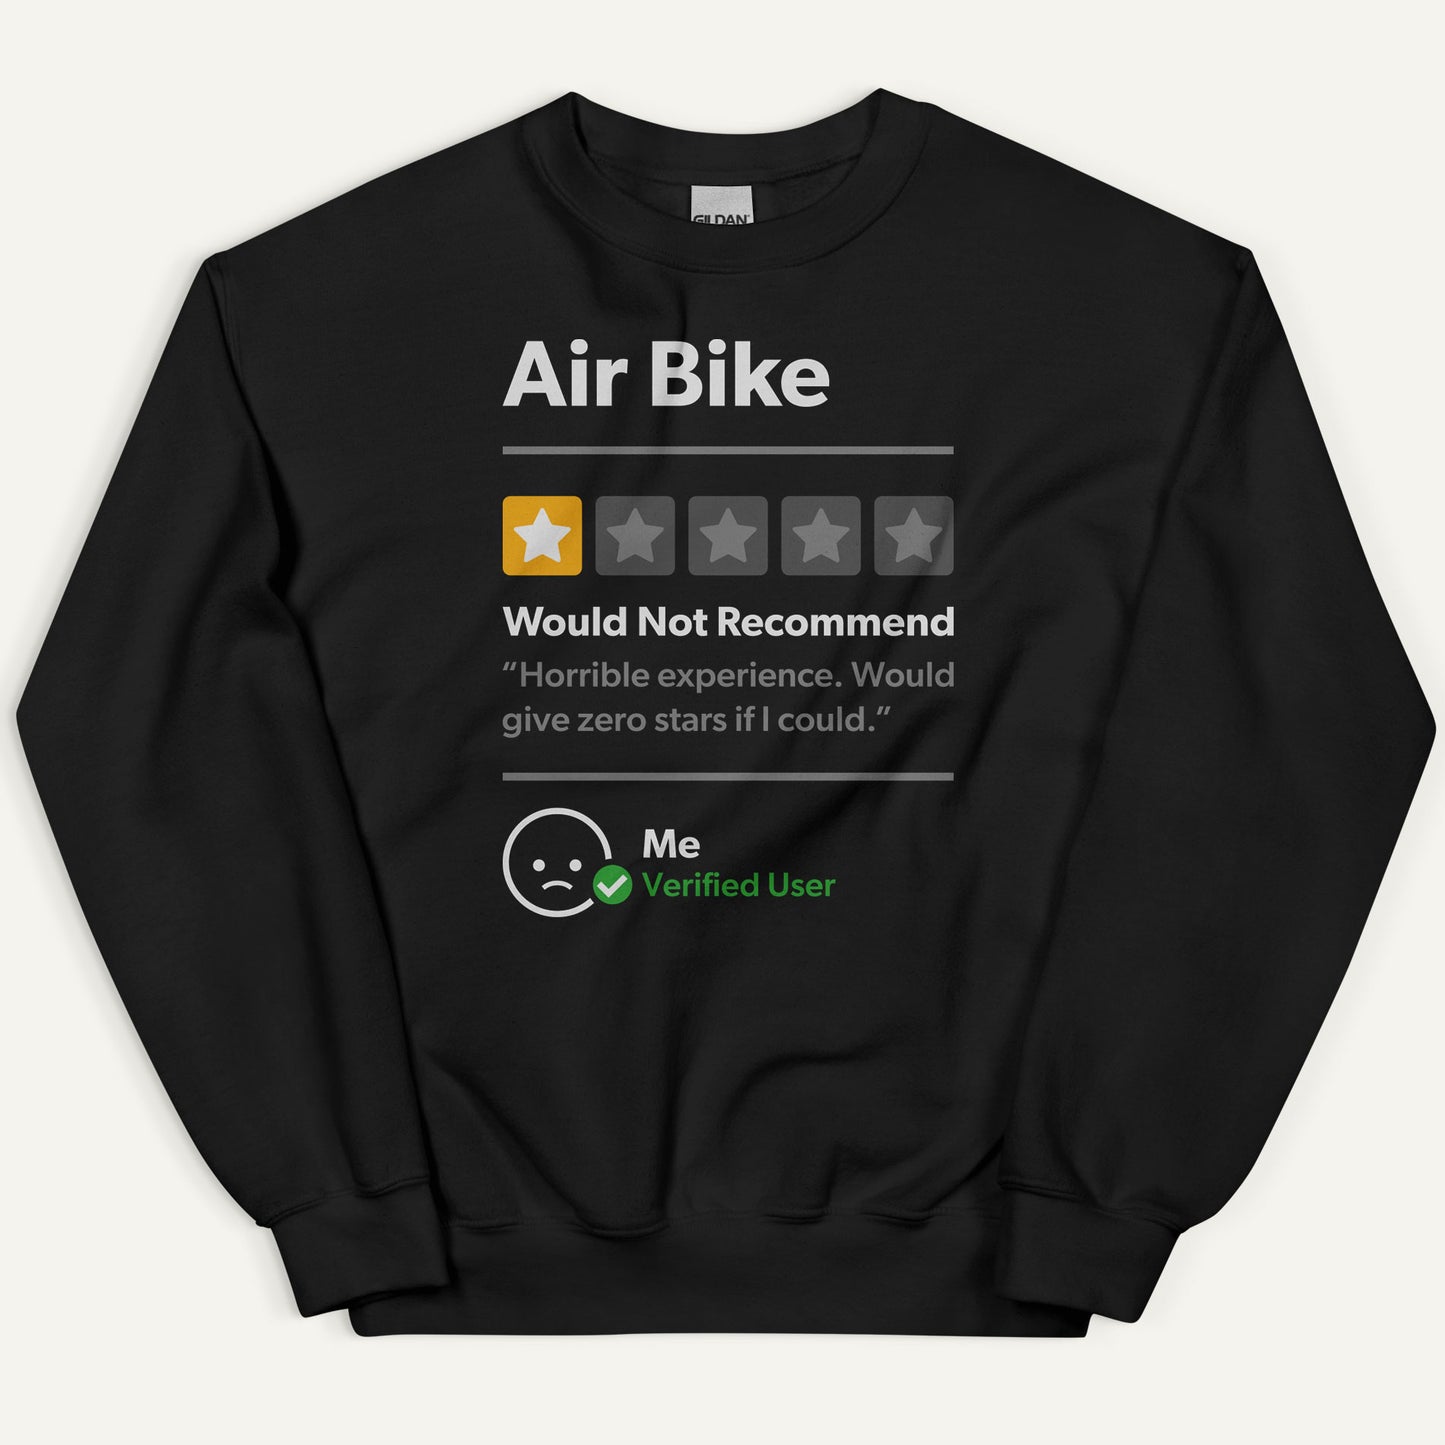 Air Bike 1 Star Would Not Recommend Sweatshirt